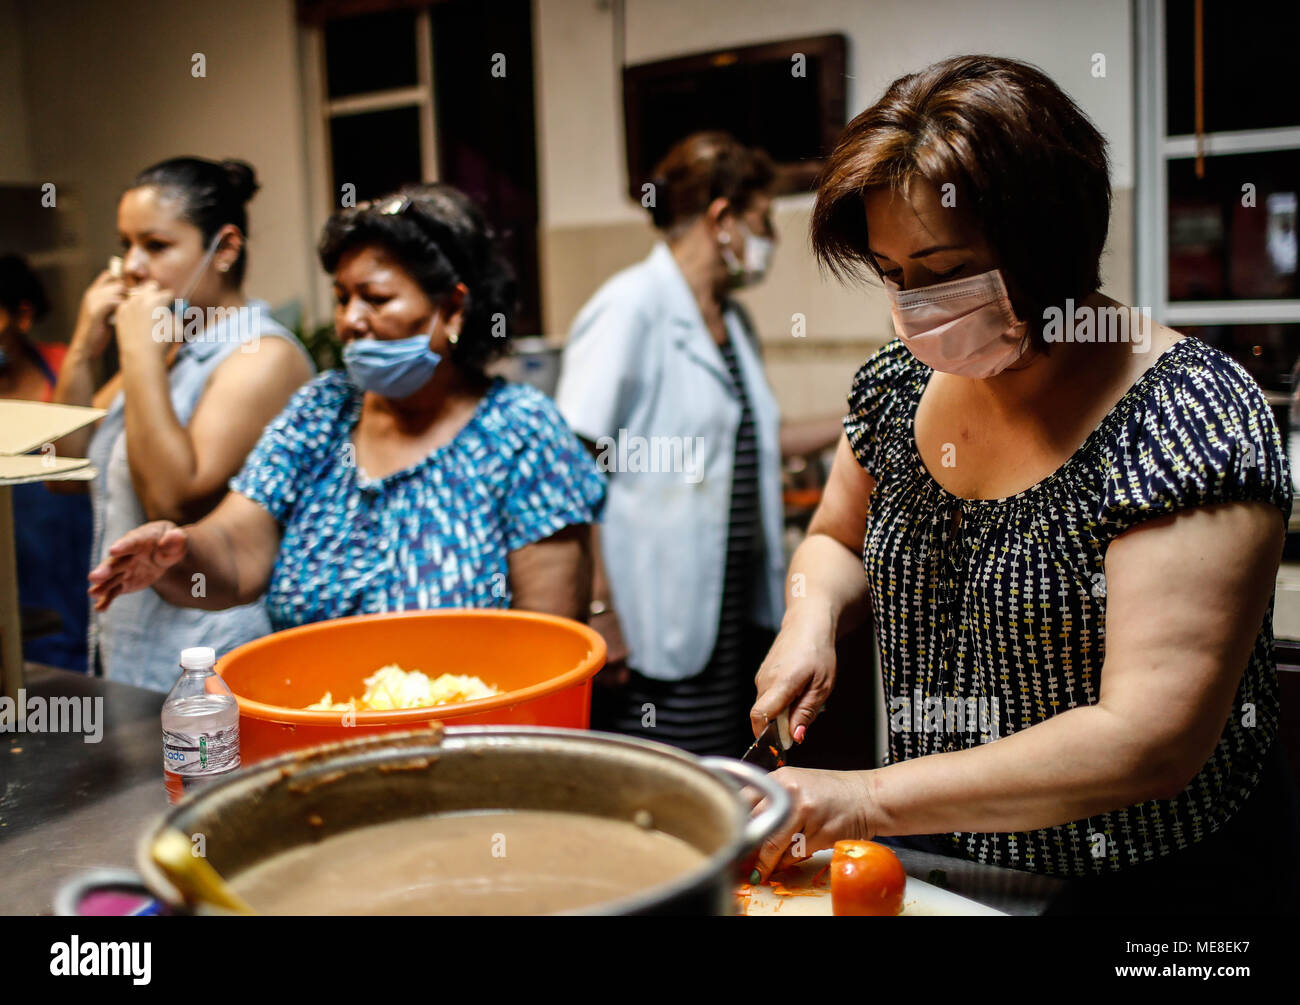 Sonara, Mexico, 21 April 2018. The Caravan of Migrants receive medical attention, food, personal hygiene and a place to rest in the community dining room of Colonia San Luis de Hermosillo, Sonora Mexico. Around 600 people, mostly of Central American origin, come from the southern border of the country and bound for the city of Tijuana. The caravan aims to request Asylum to the United States through a humanitarian visa, La Caravana provoked the wrath of President Donald Trump for this trip to the border with the United States. Credit: NortePhoto.com/Alamy Live News Stock Photo